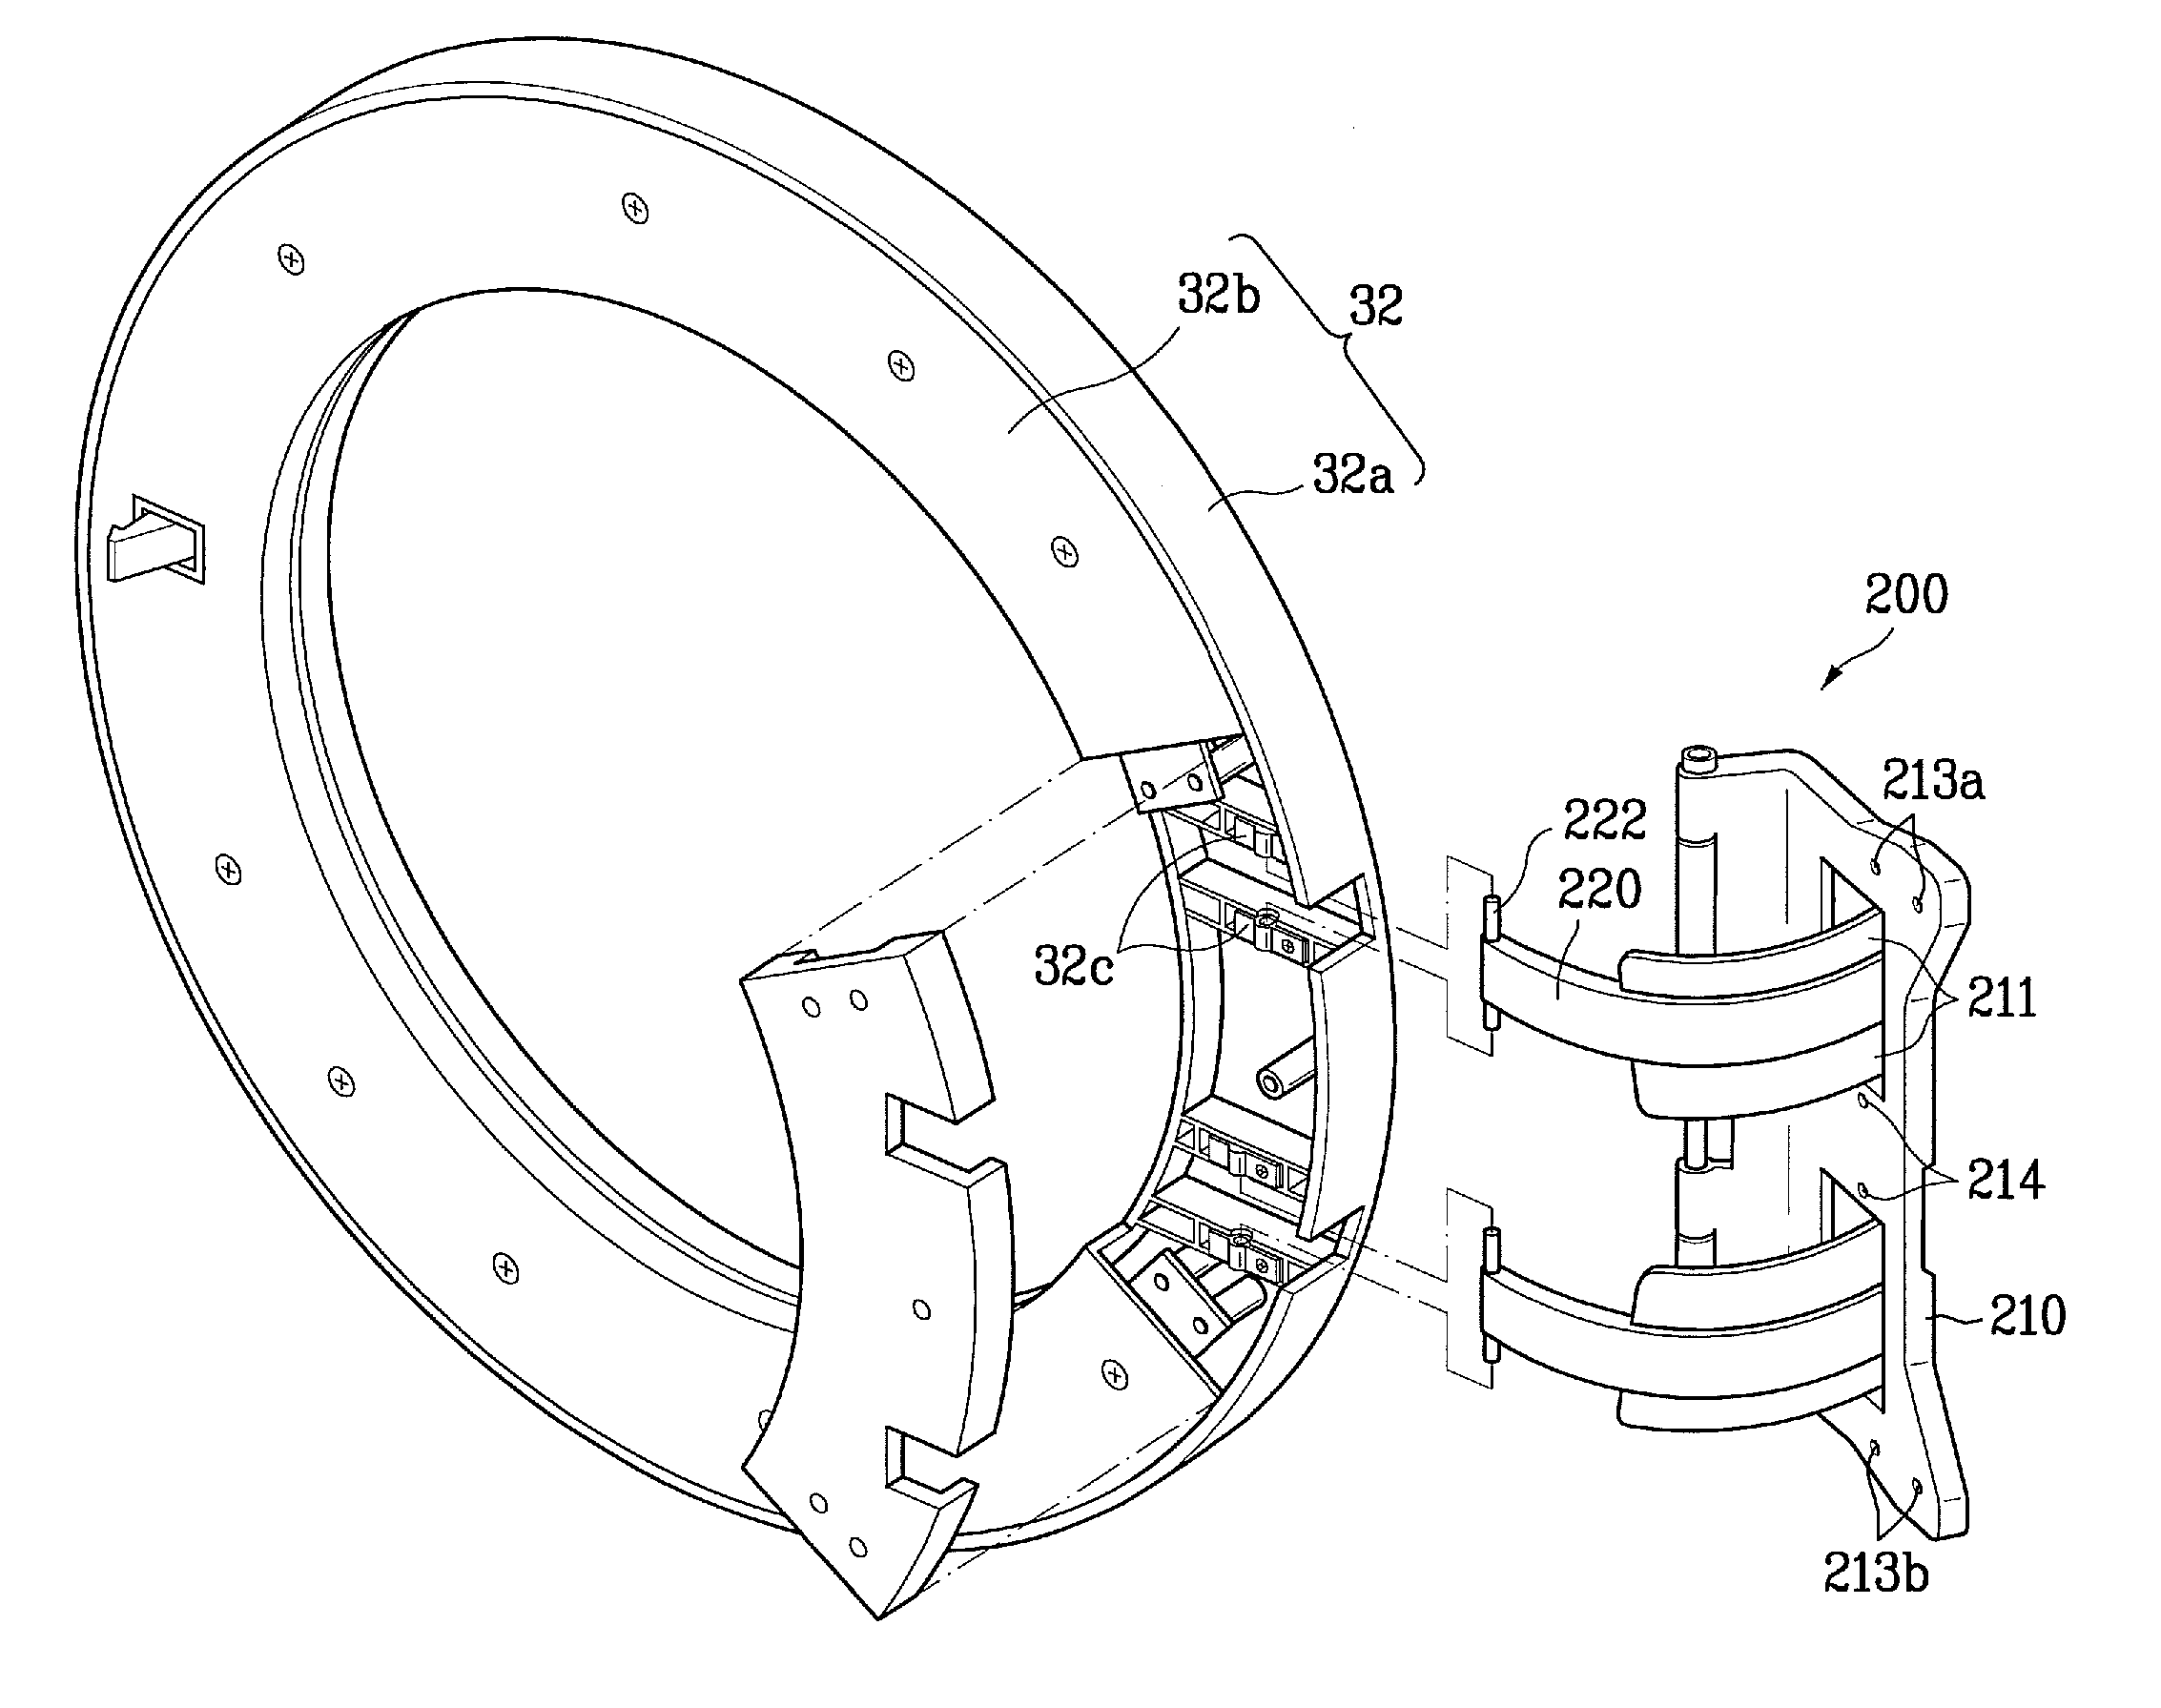 Hinge assembly for door of laundry device